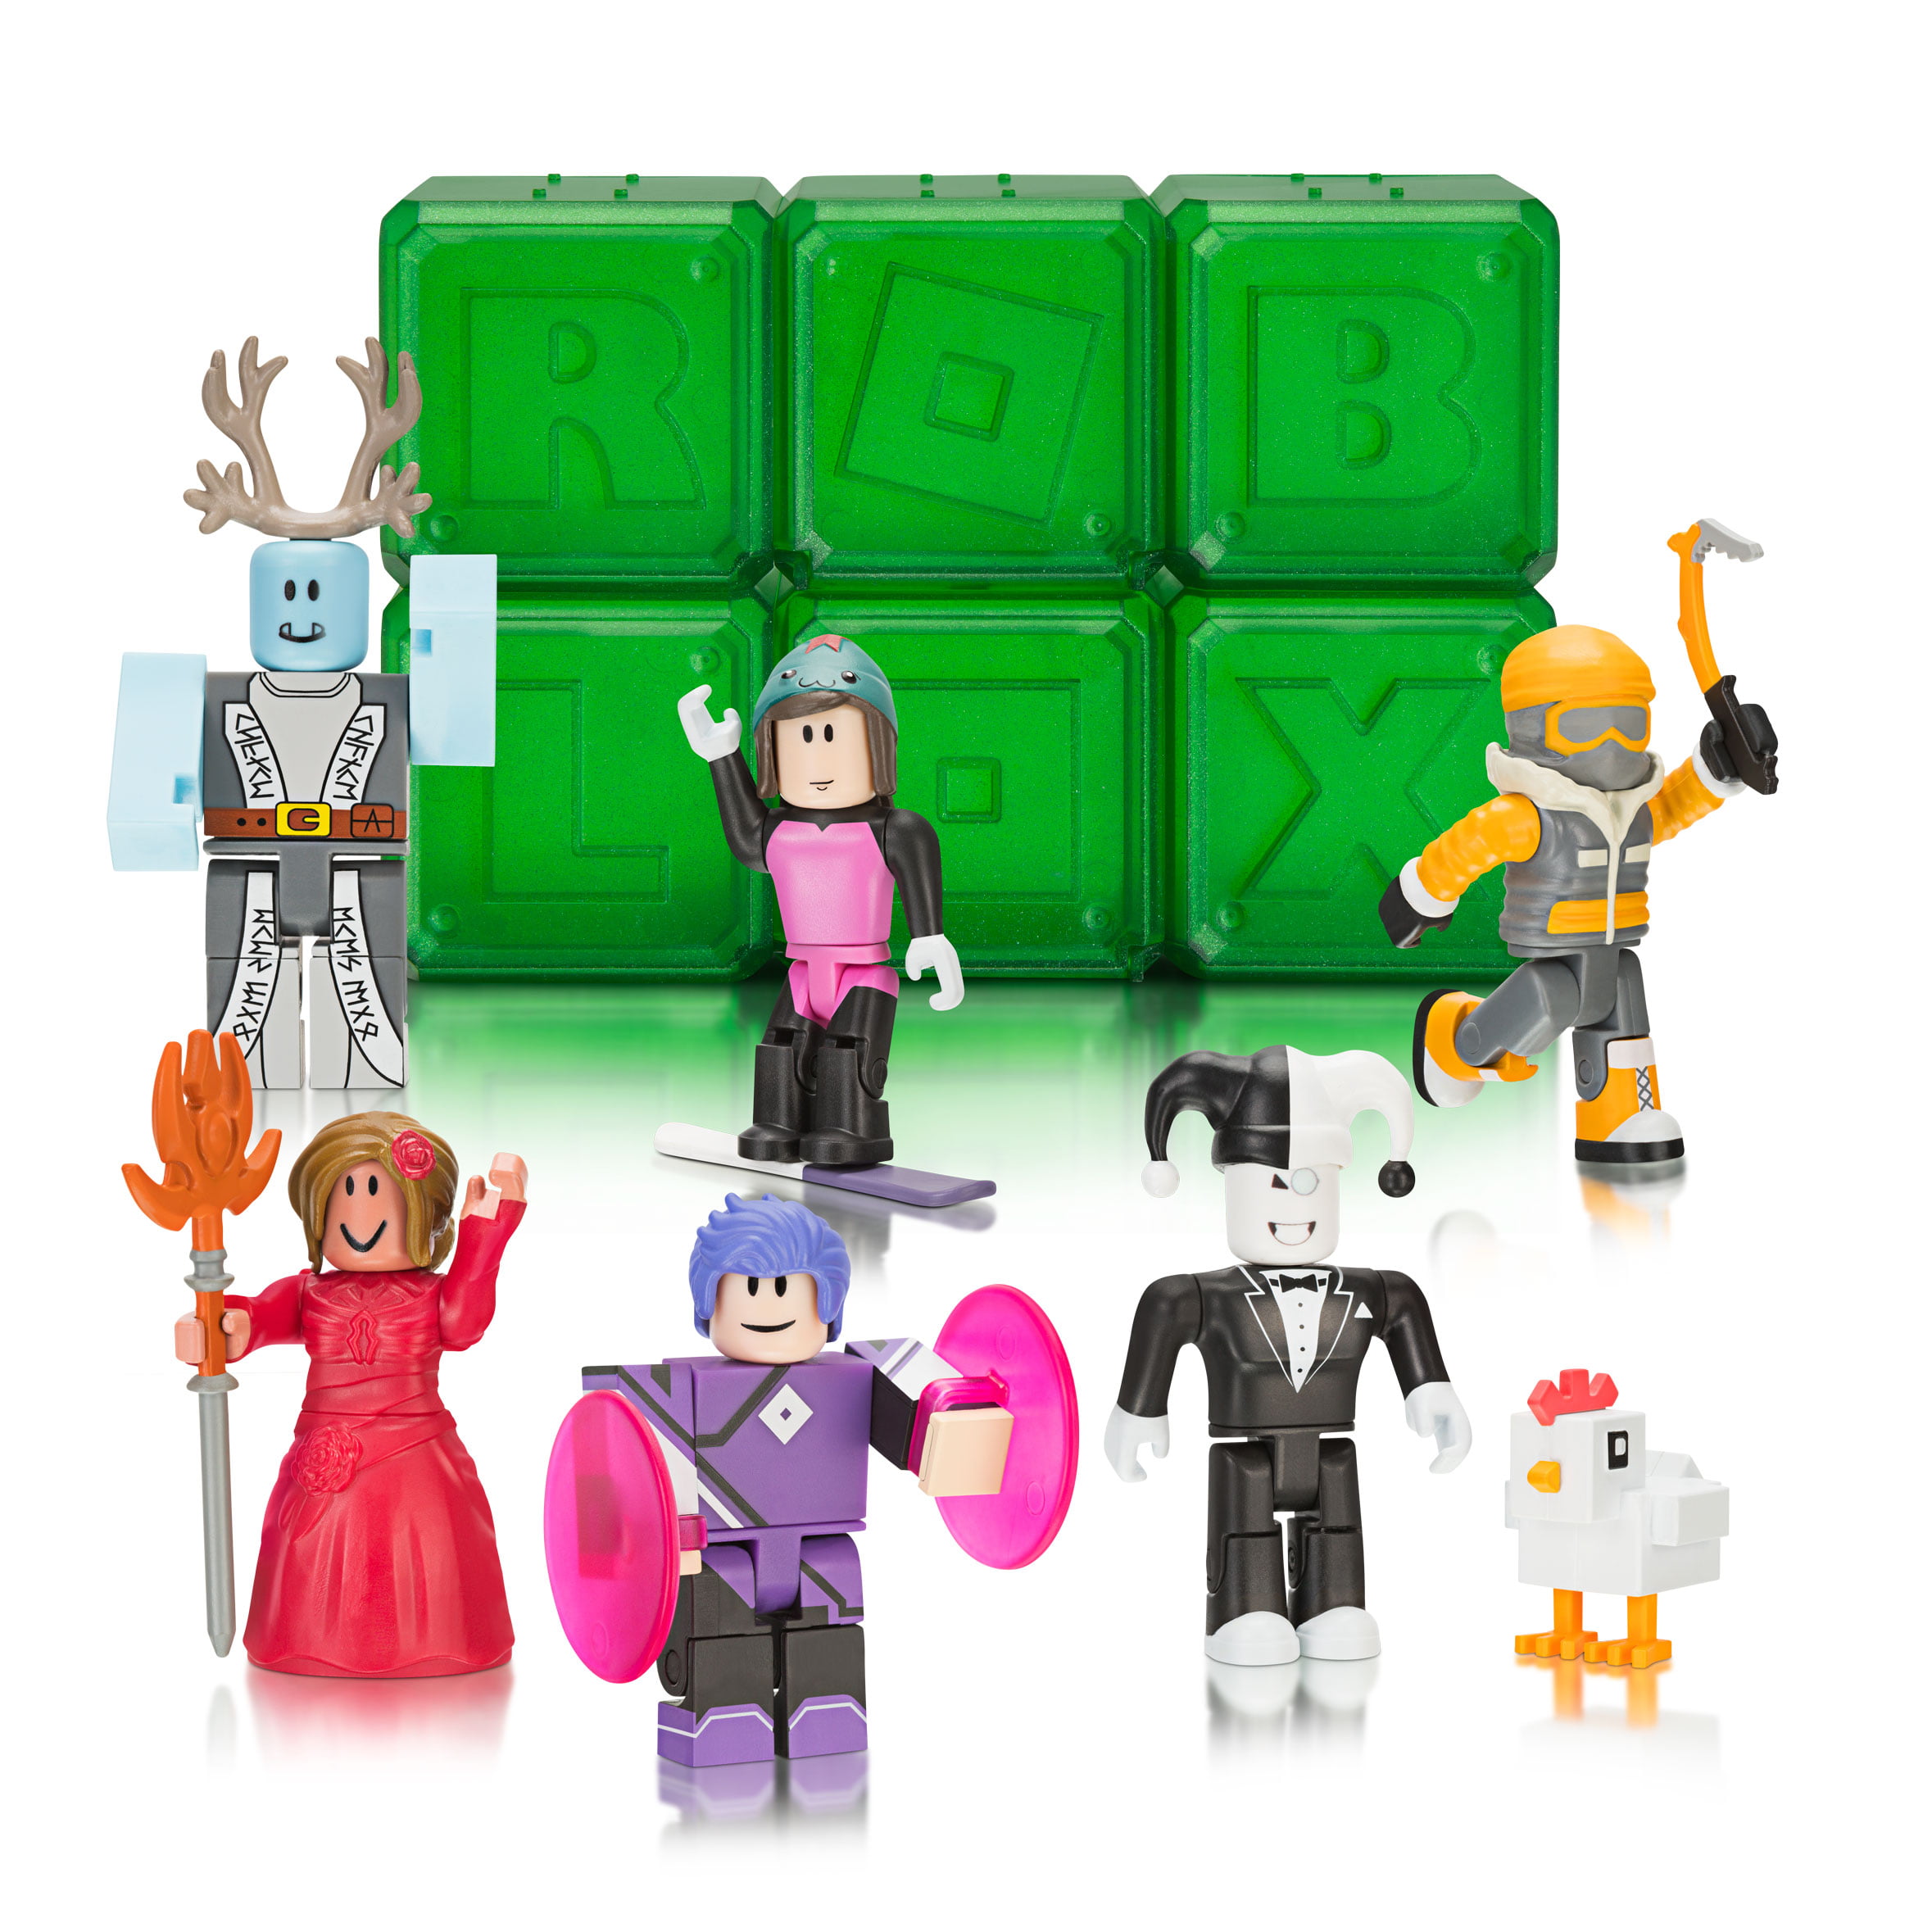 Jazwares Roblox Series 4 Red Brick Mystery Box Action Figure -  10782JAZ10782 for sale online